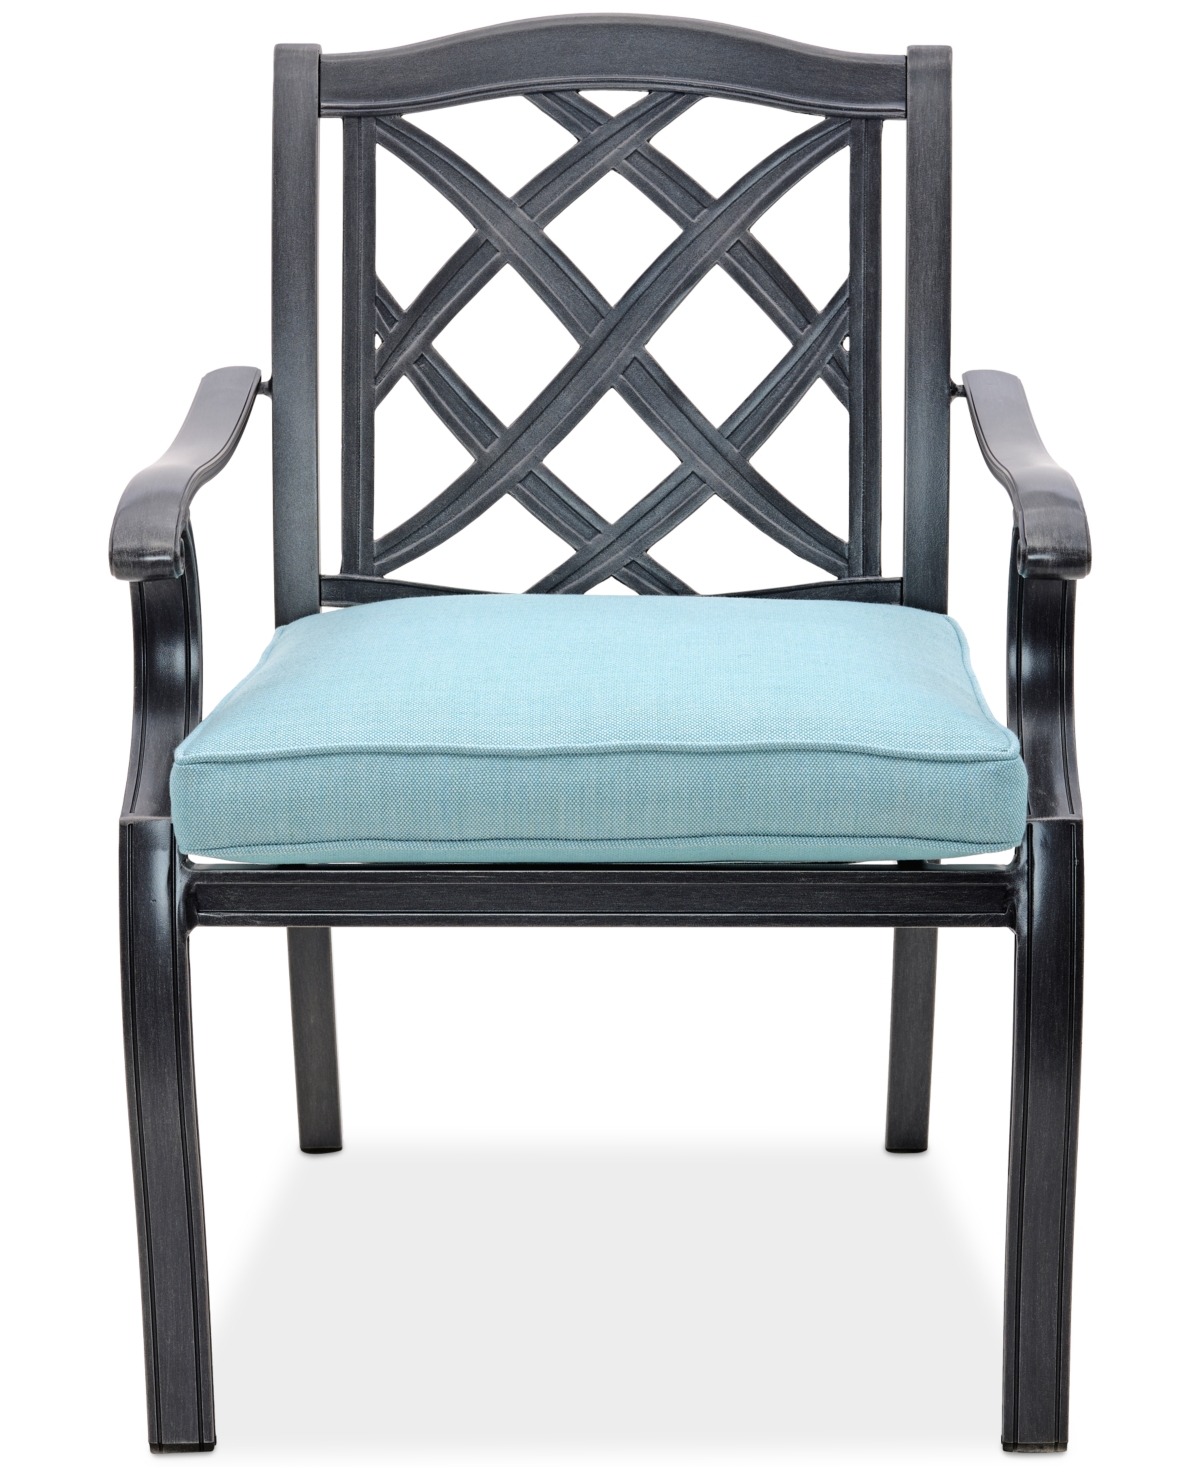 Shop Agio Wythburn Mix And Match Lattice Outdoor Dining Chair In Spa Light Blue,pewter Finish